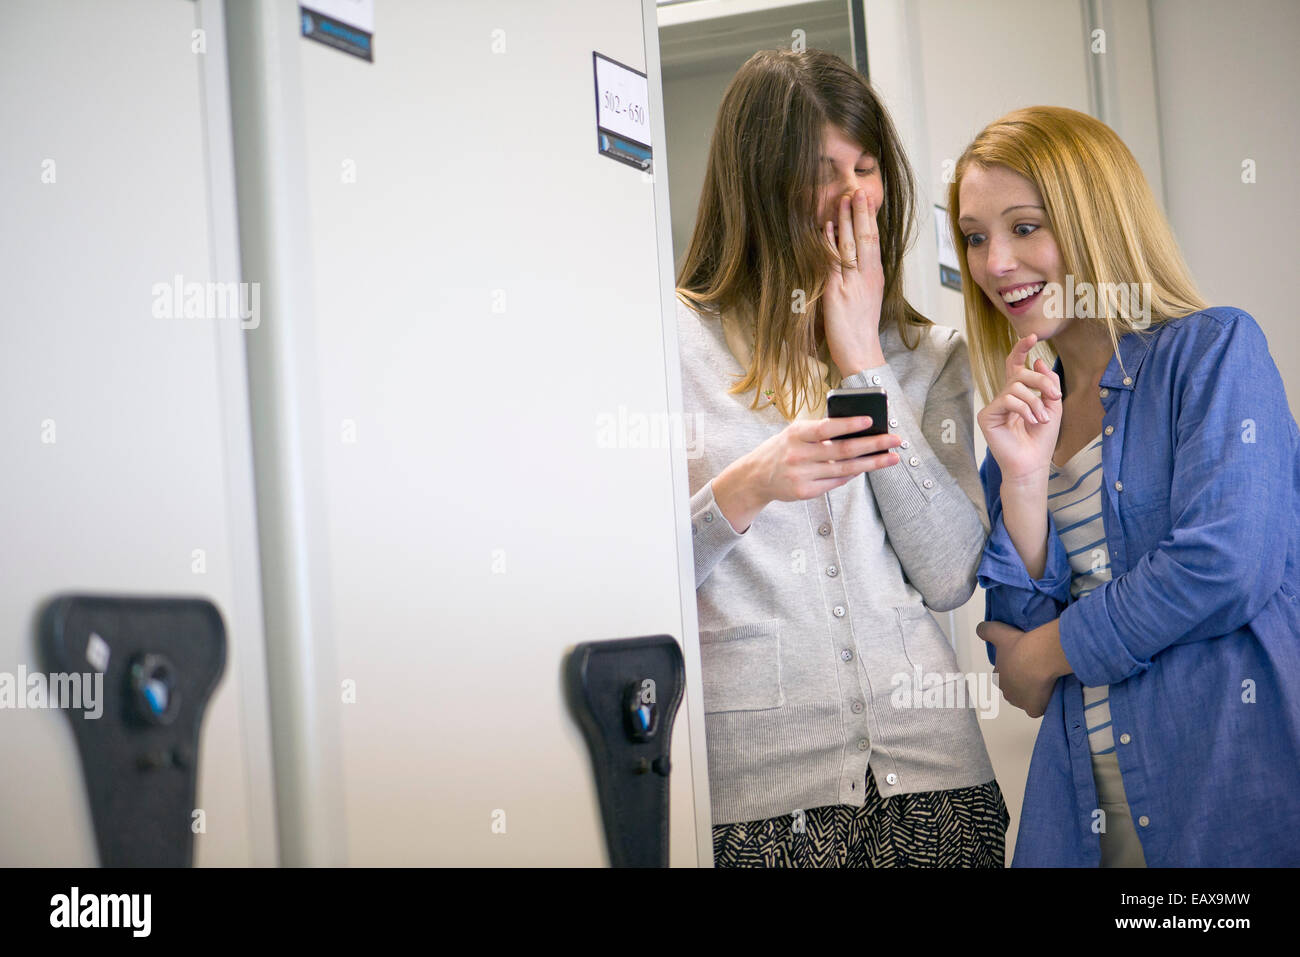 Women laughing at smartphone in office Stock Photo